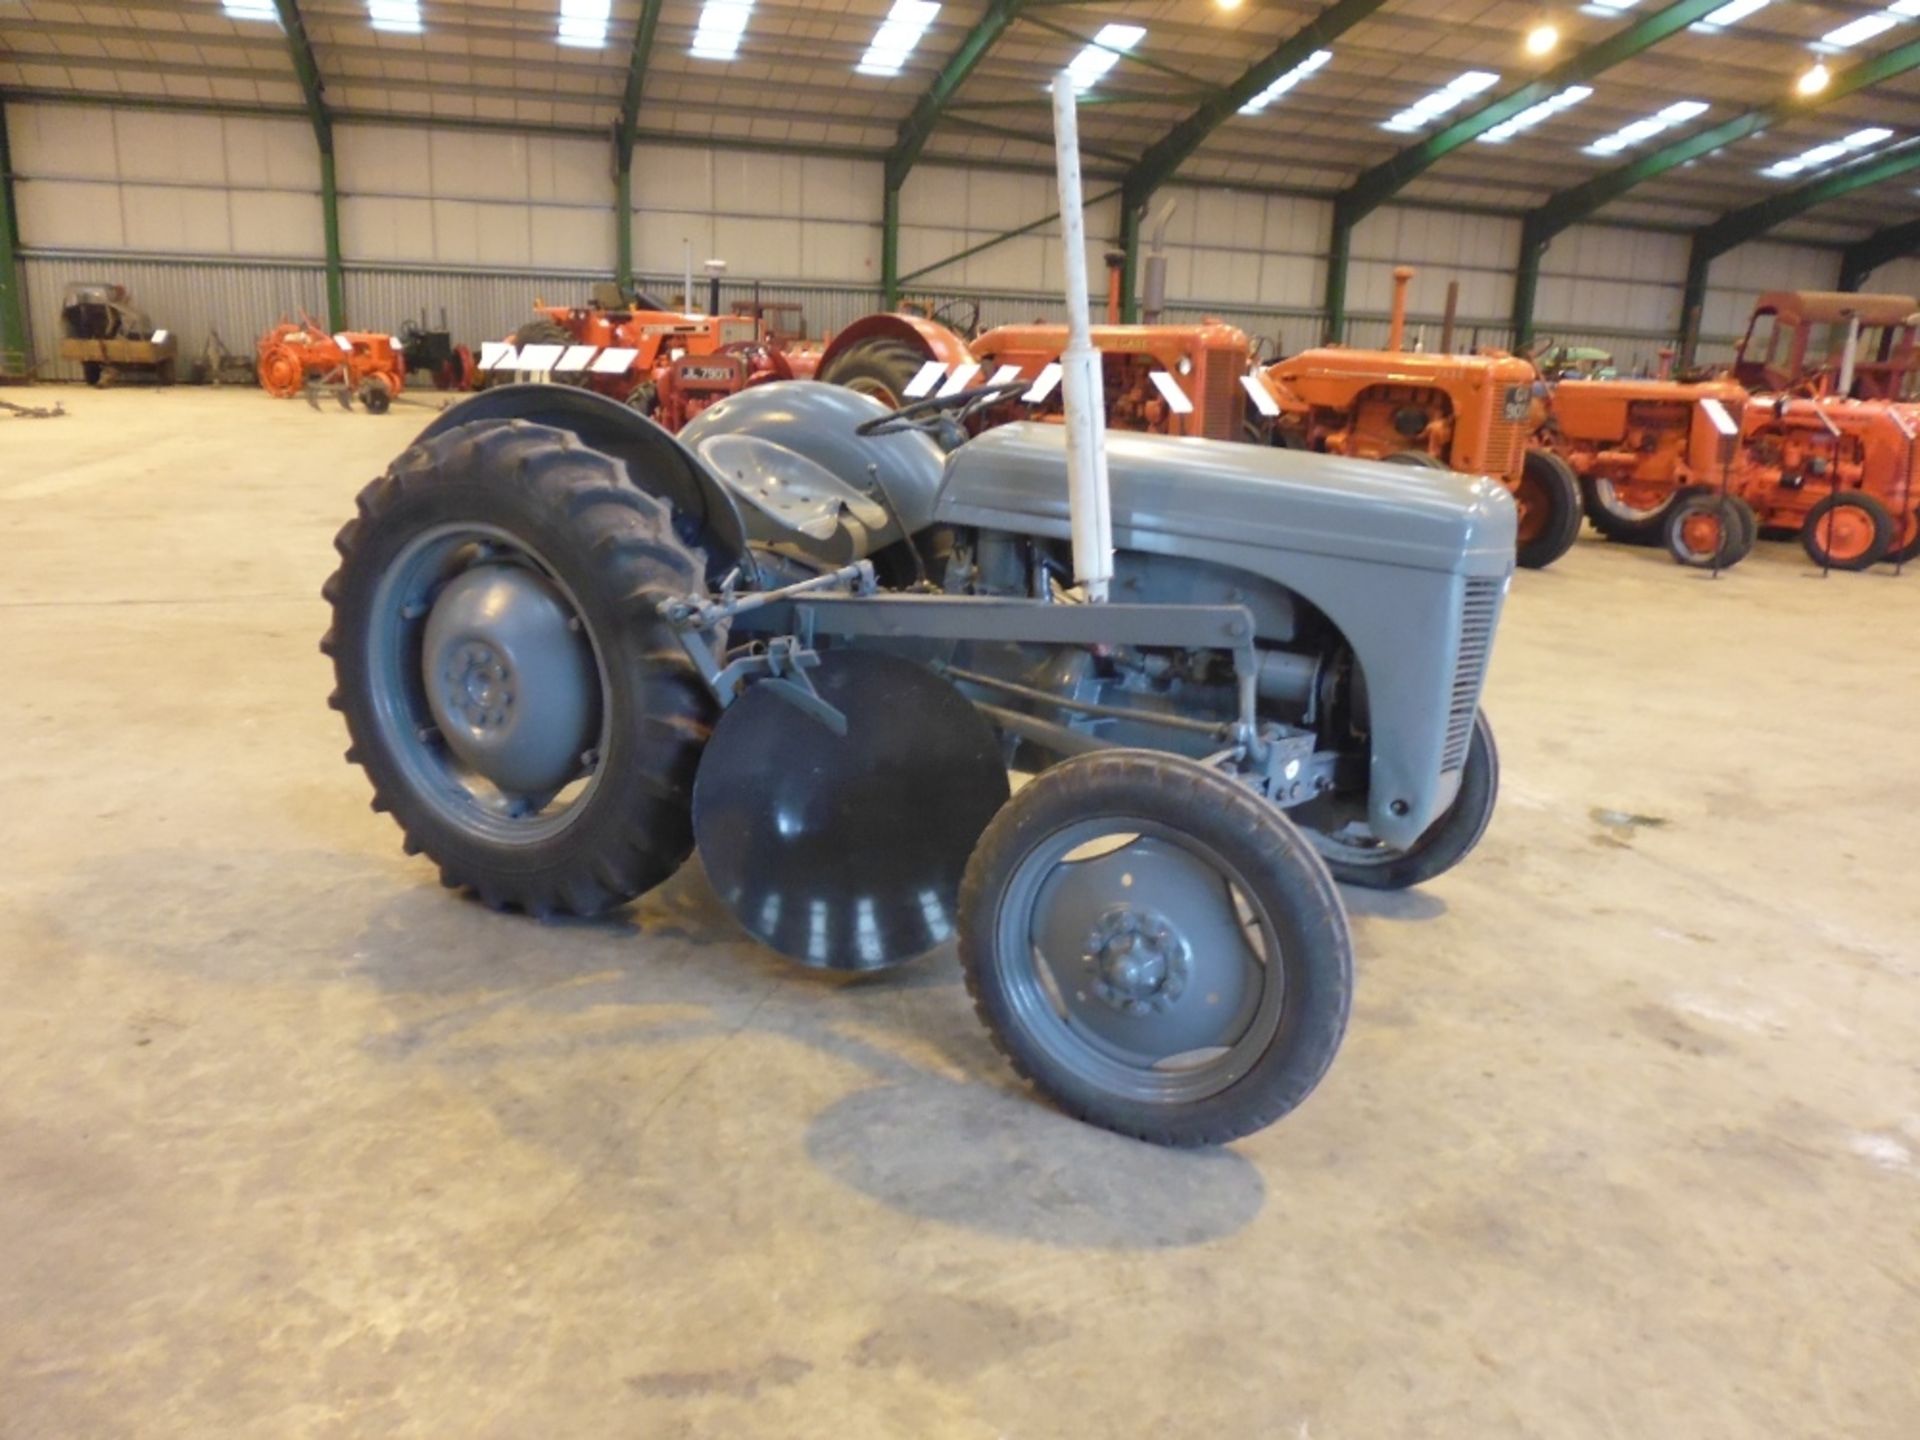 1950 FERGUSON TE-D20 4cylinder petrol/paraffin TRACTOR Reg No: 472 XUA Serial No: TED141665 Fitted - Image 3 of 4